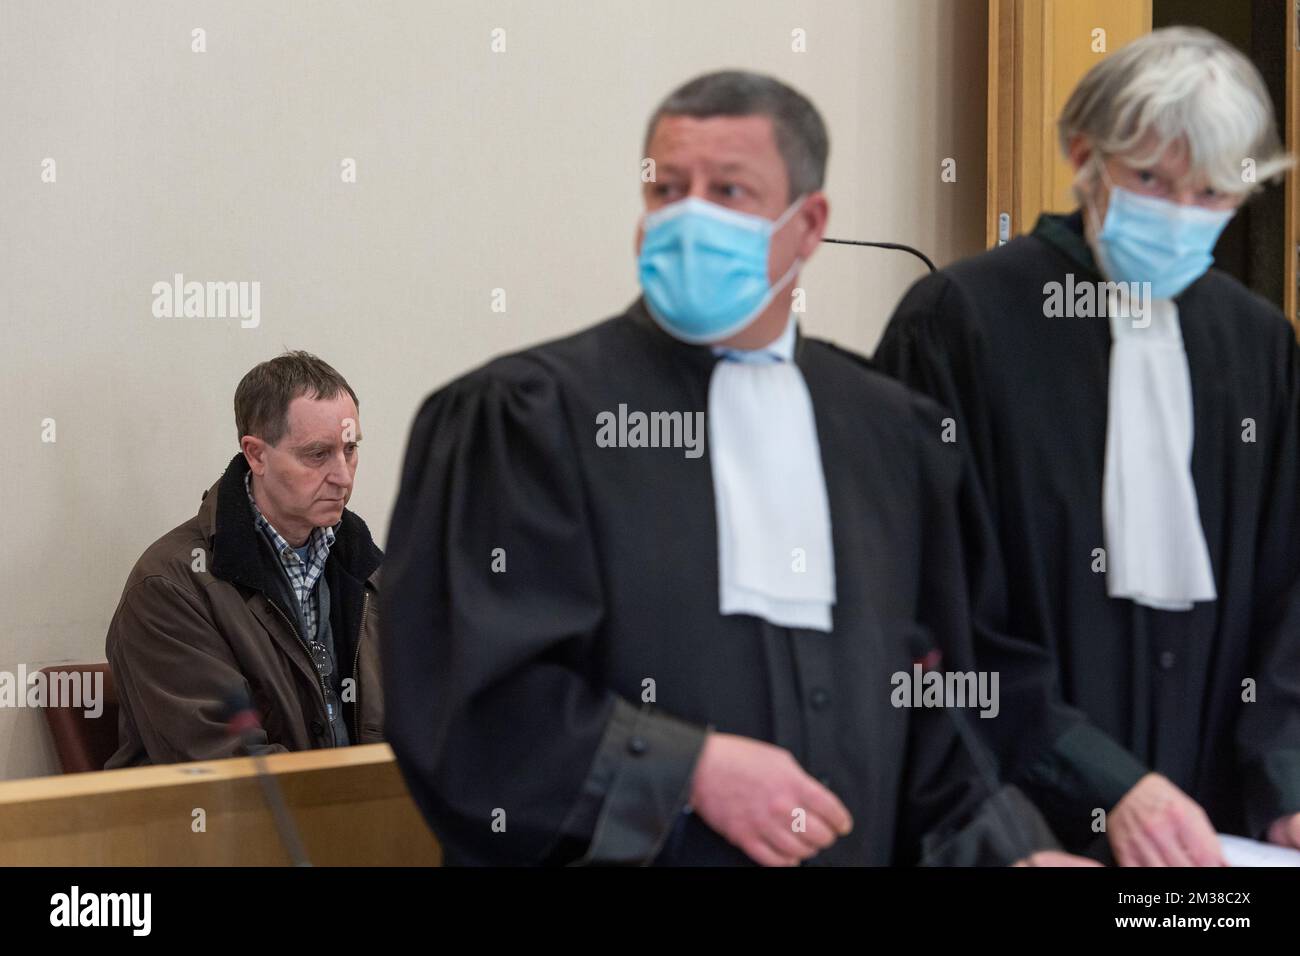 The accused Karel B. is seen at the jury constitution for the assizes trial of Karel B., before the Assizes Court of Limburg in Tongeren on Tuesday 15 February 2022. Ten months after his wife Annick Haesevoets had died, Karel B. ended up in jail on February 7, 2017. Only then did it become clear why the woman had died in April 2016. A jar of tiramisu that she had eaten turned out to contain large doses of remnants of medicines, including sleeping pills. The man vehemently denies his involvement. Since February 2018 he was allowed to go home with an ankle bracelet. BELGA PHOTO JONAS ROOSENS Stock Photo